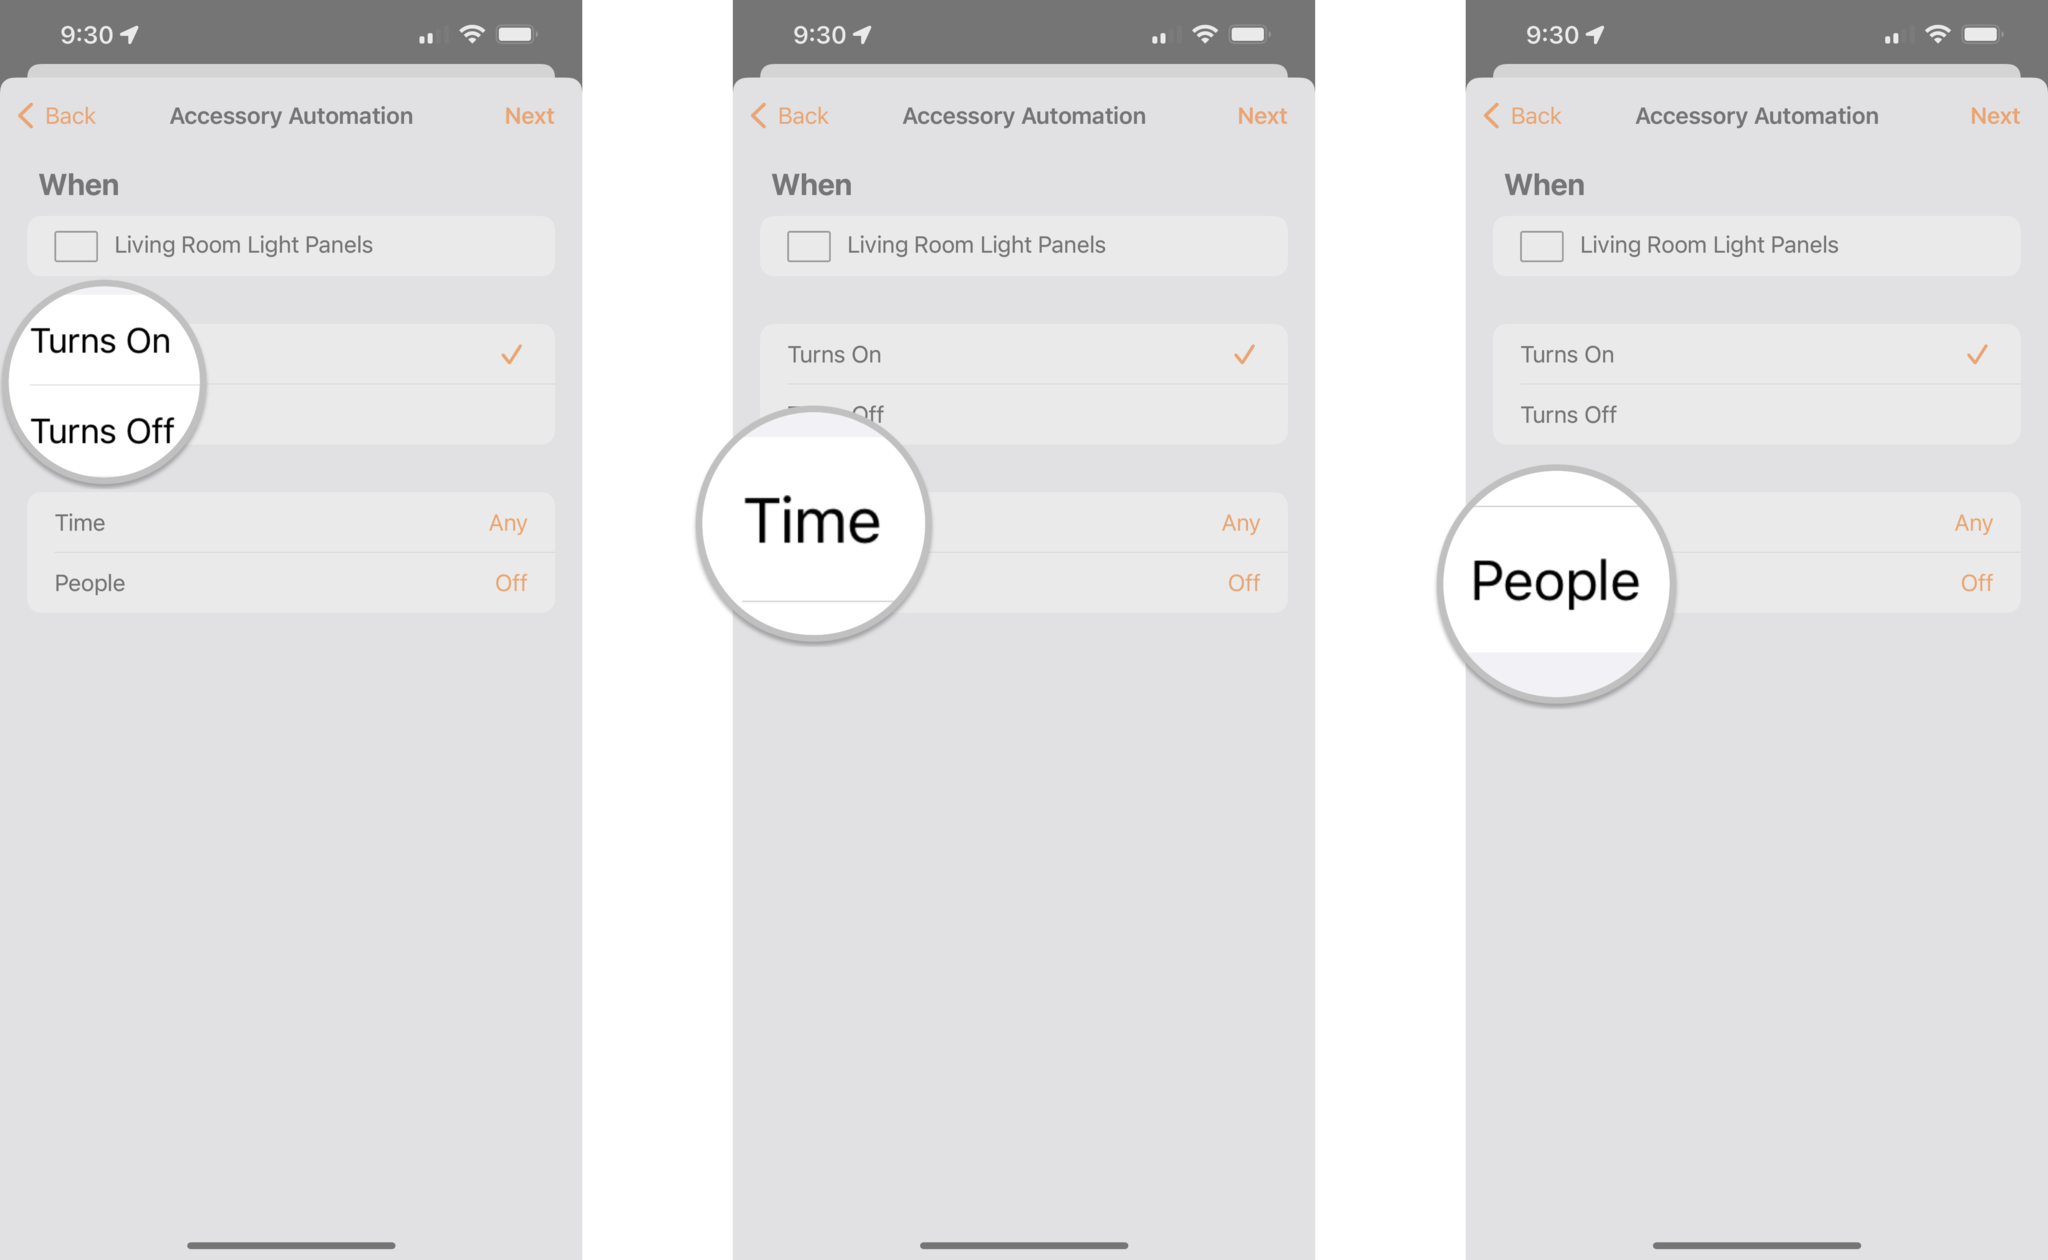 How to create an accessory automation in the Home app on the iPhone by showing steps: Choose an accessory state with a tap, Tap Time, Tap People